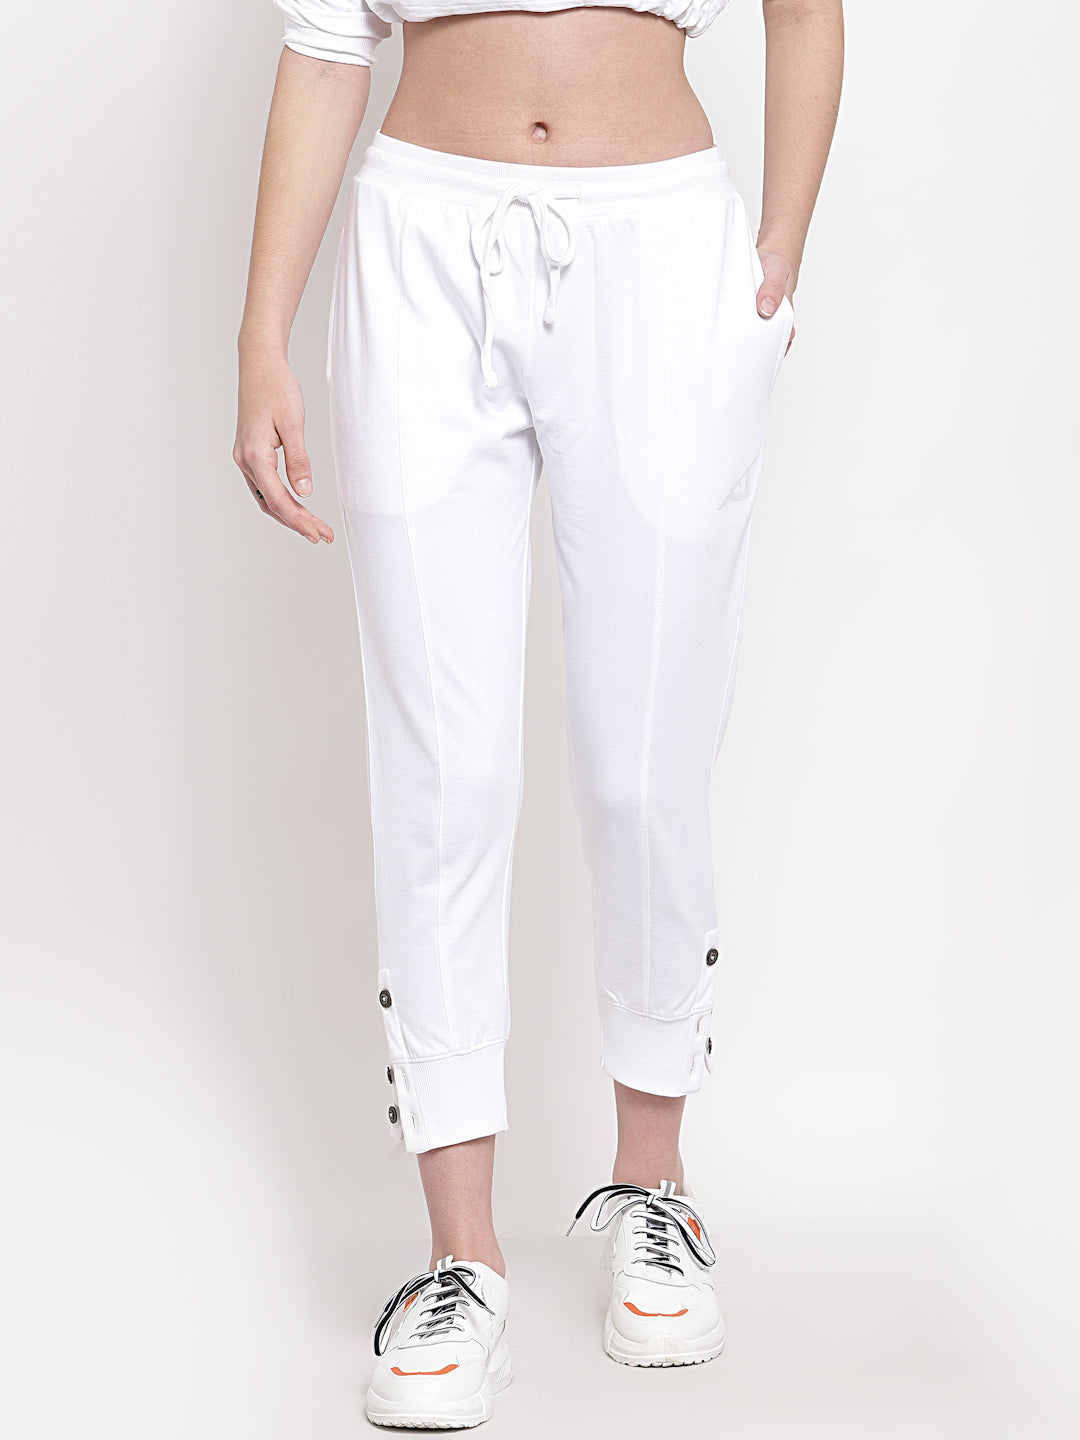 Ankle Jeans Joggers Pants for Women Pack White Ankle Pants Women